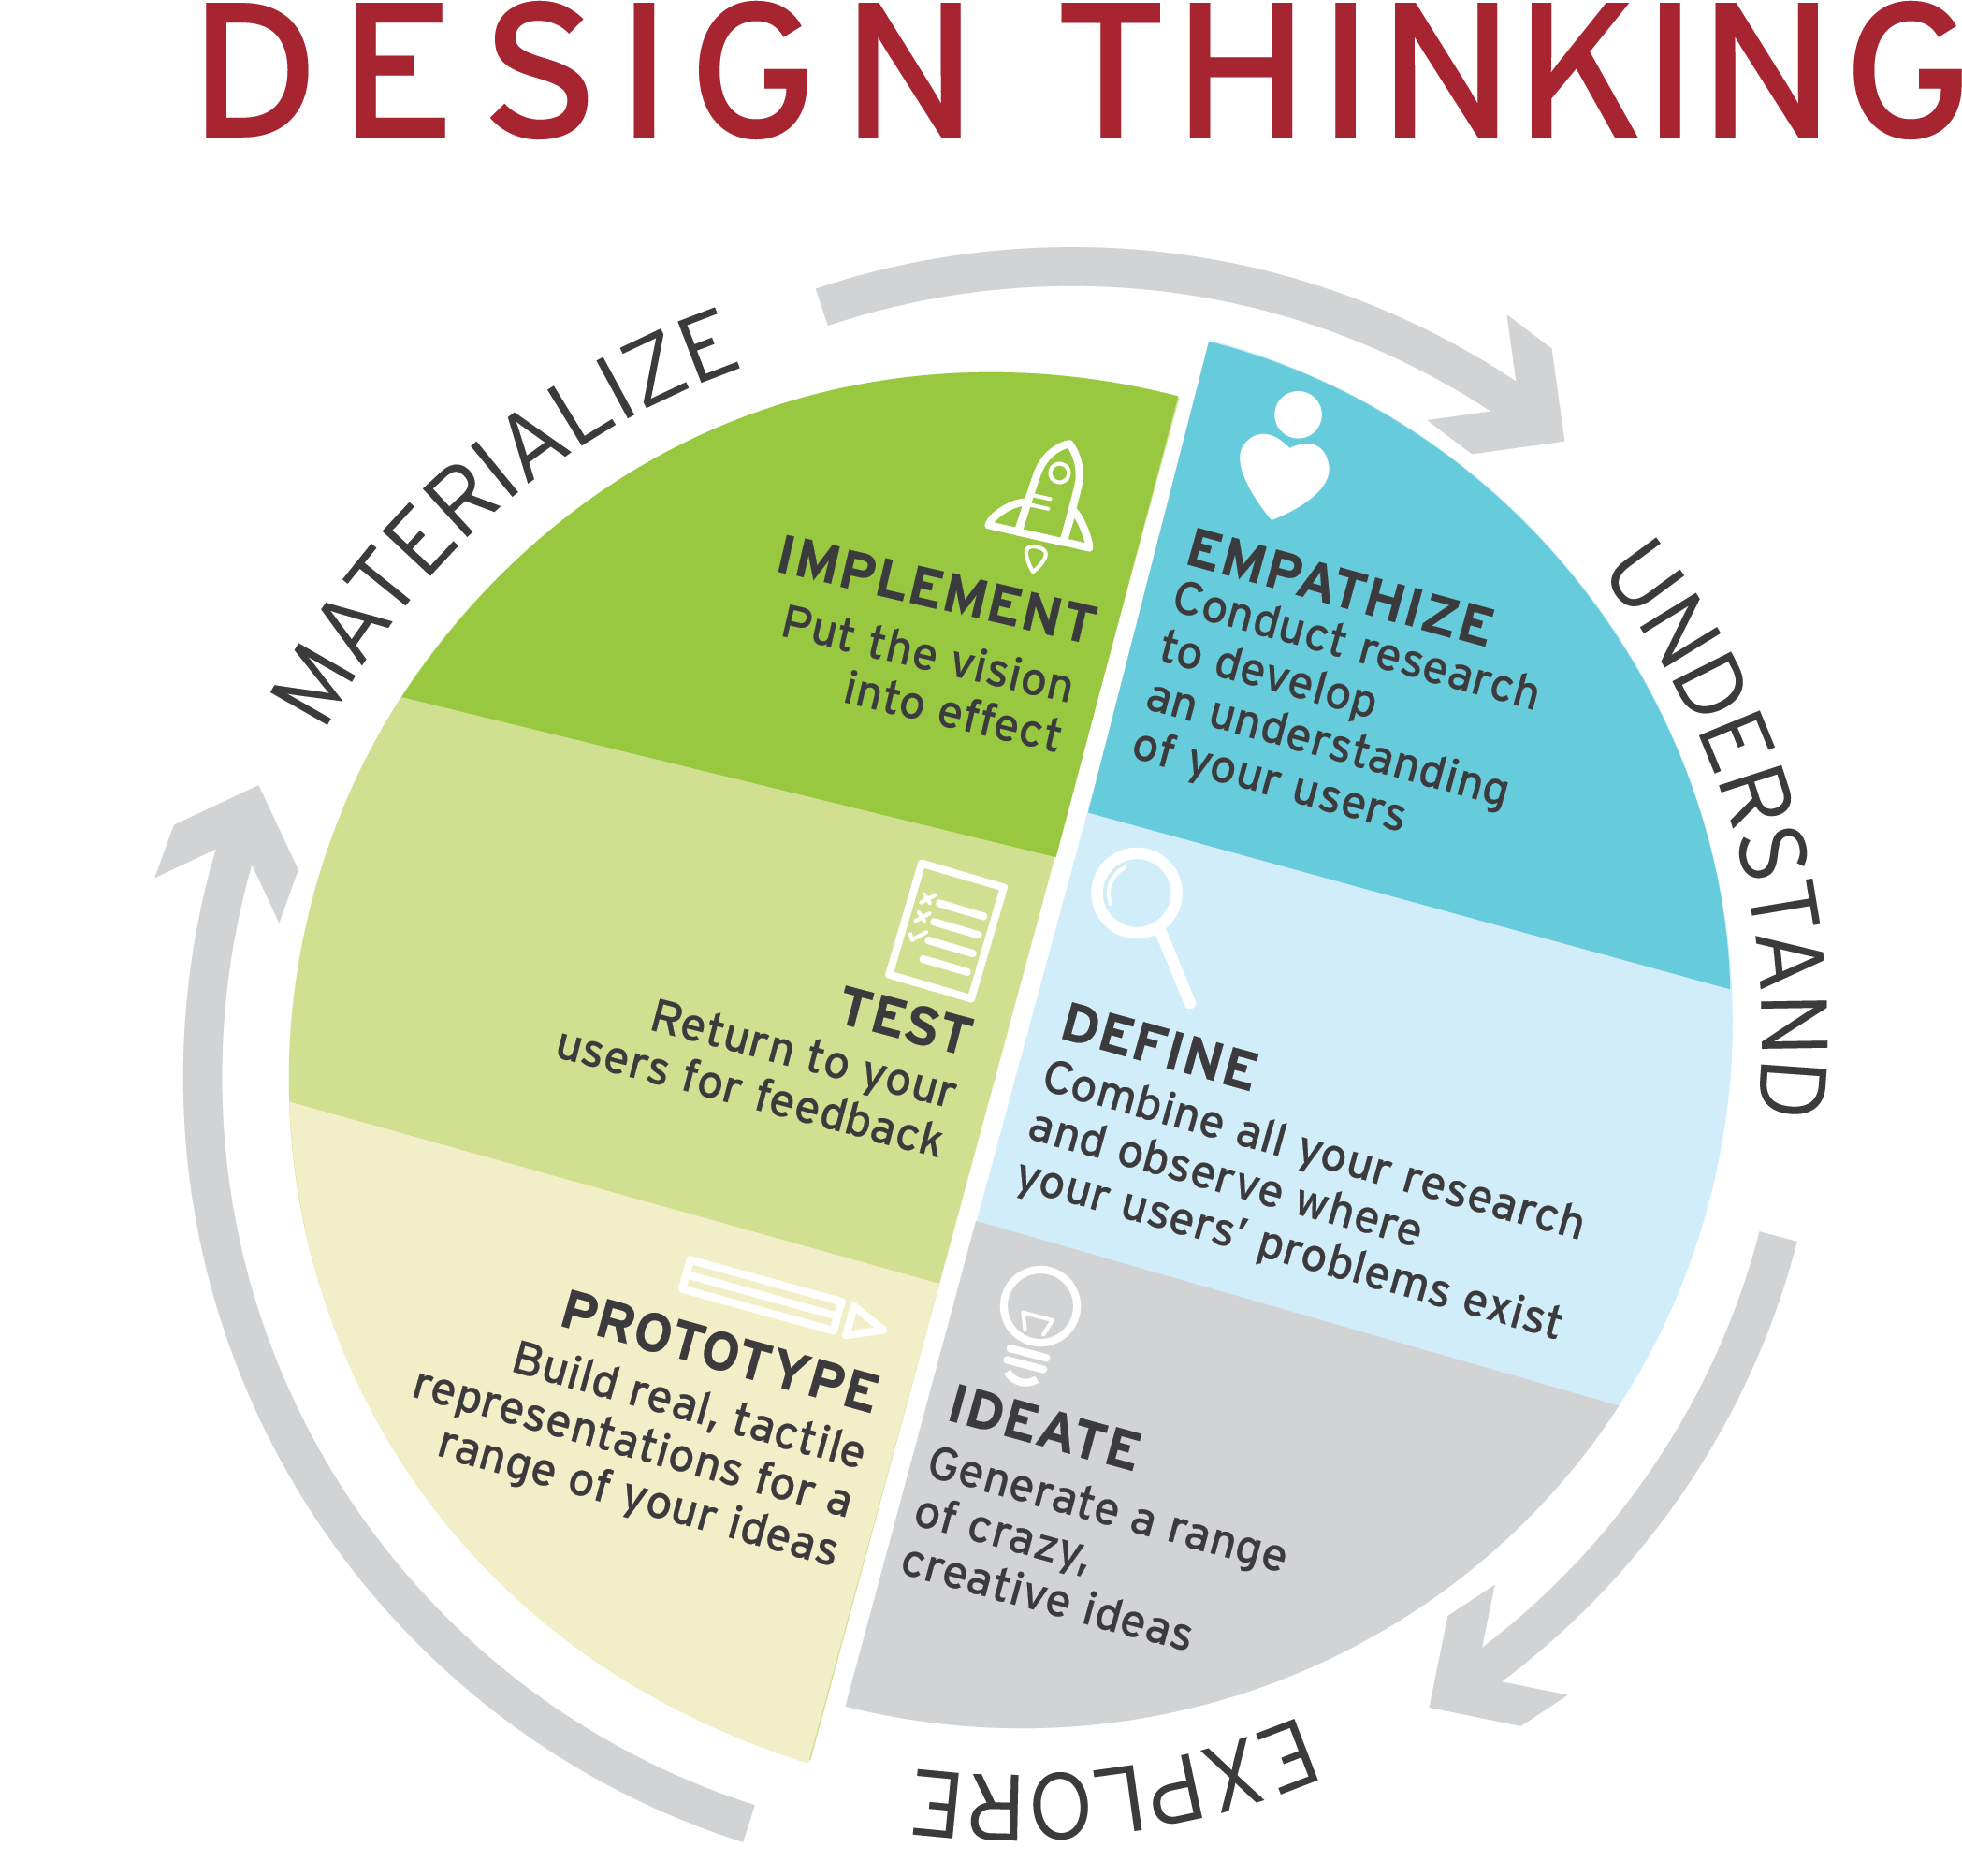 Design Thinking Process - Tennessee Arts Commission